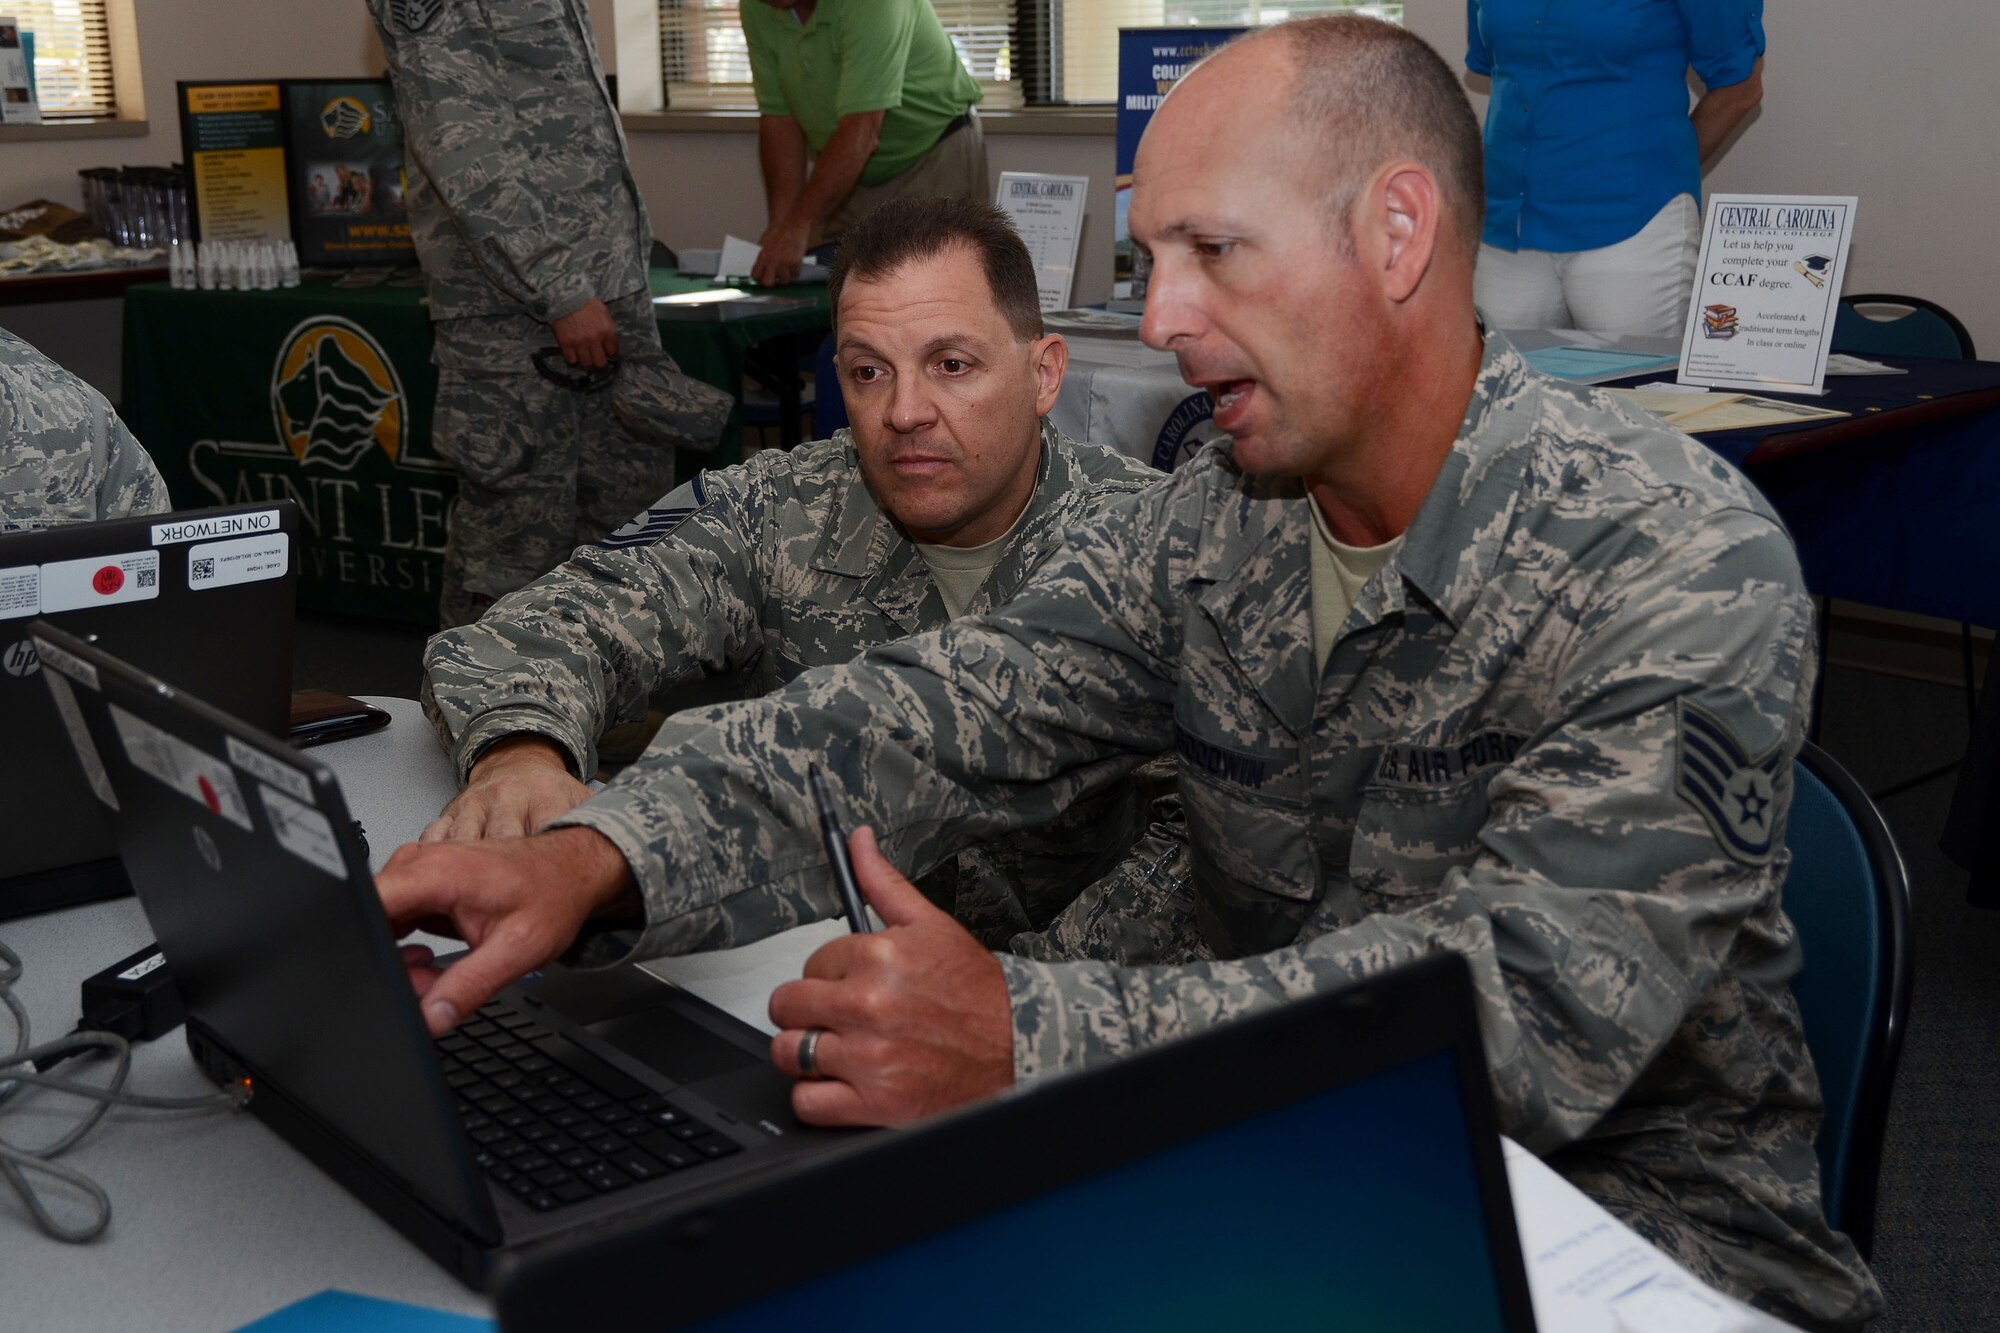 U.S. Air Force Master Sgt. Derek Lacy, assigned to the Community College of the Air Force, assists Staff Sgt. Tony Goodwin, assigned to the 169th Fighter Wing, in updating his CCAF education level during an education fair on McEntire Joint National Guard Base, S.C. July 12, 2014.  Lacy is promoting the National Guard Bureau's Airmen Development Program and encouraging Airmen to progress with their technical degree.  (U.S. Air National Guard photo by Airman 1st Class Ashleigh S. Pavelek/Released)